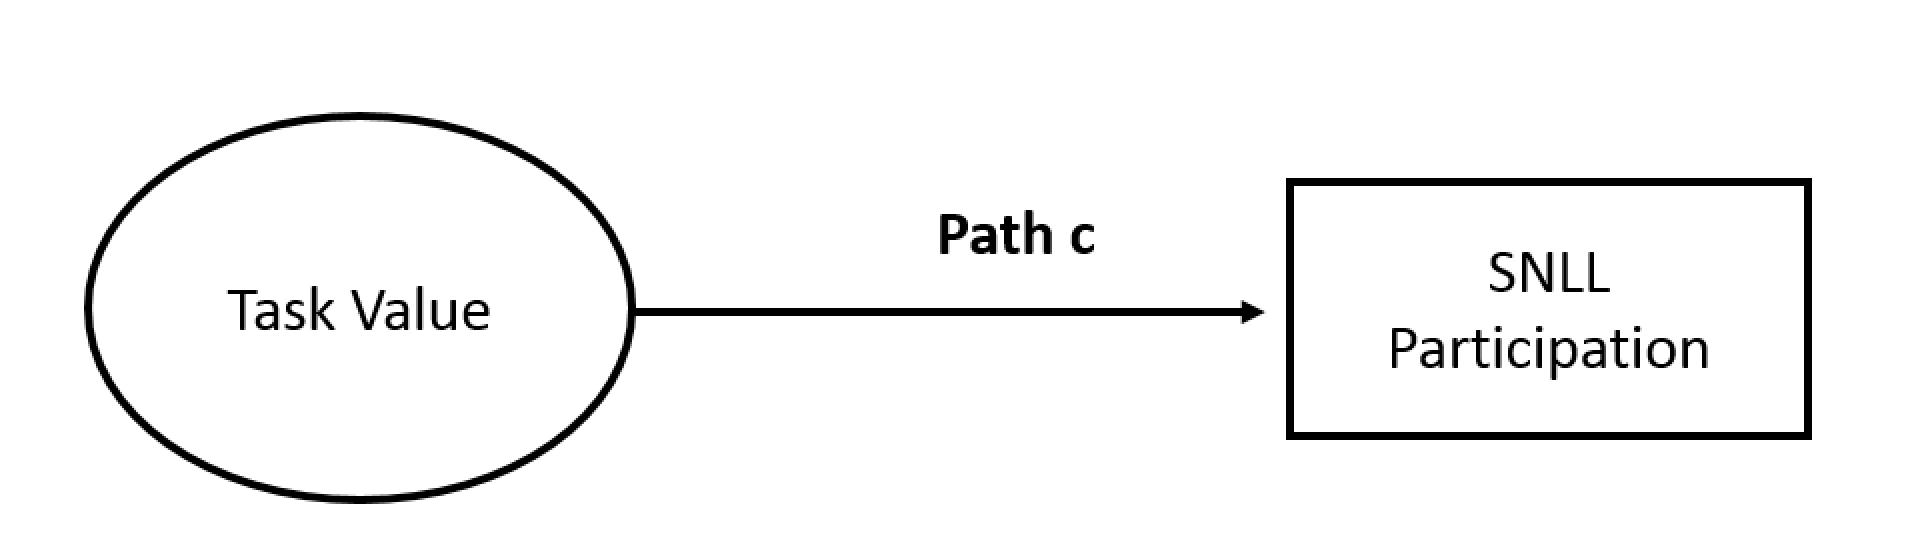 Path Diagram of the Direct Relationship